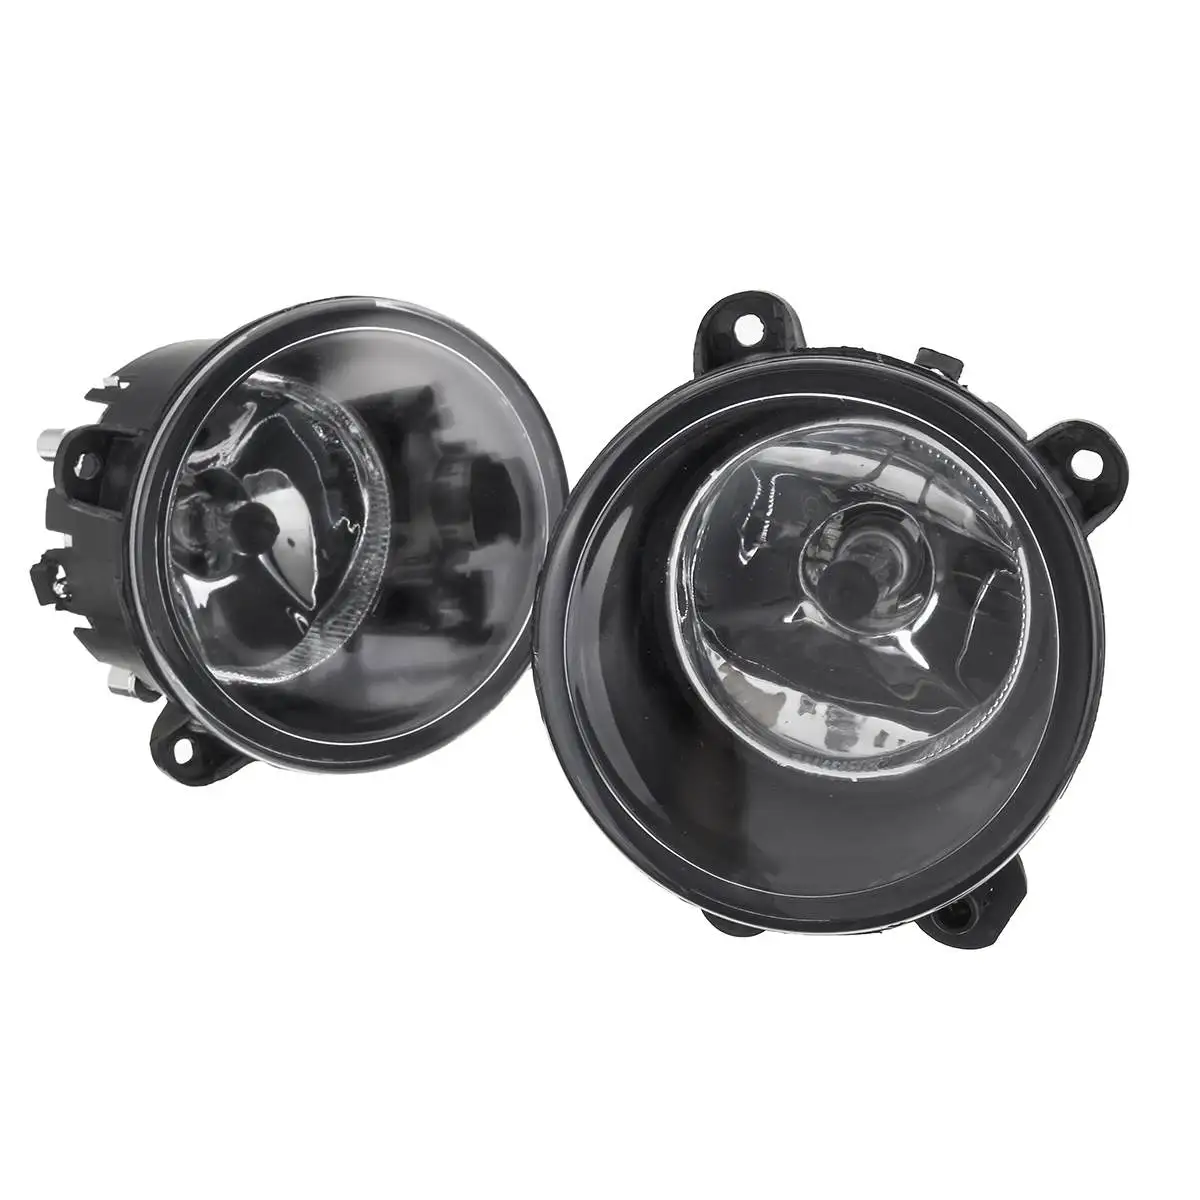 Pair For Land Range Rover Sport Discovery 3 Vehicle 2003~2009 Car Oe Parts Xbj000080 Xbj000090 Driving Fog Lights Lamps embly